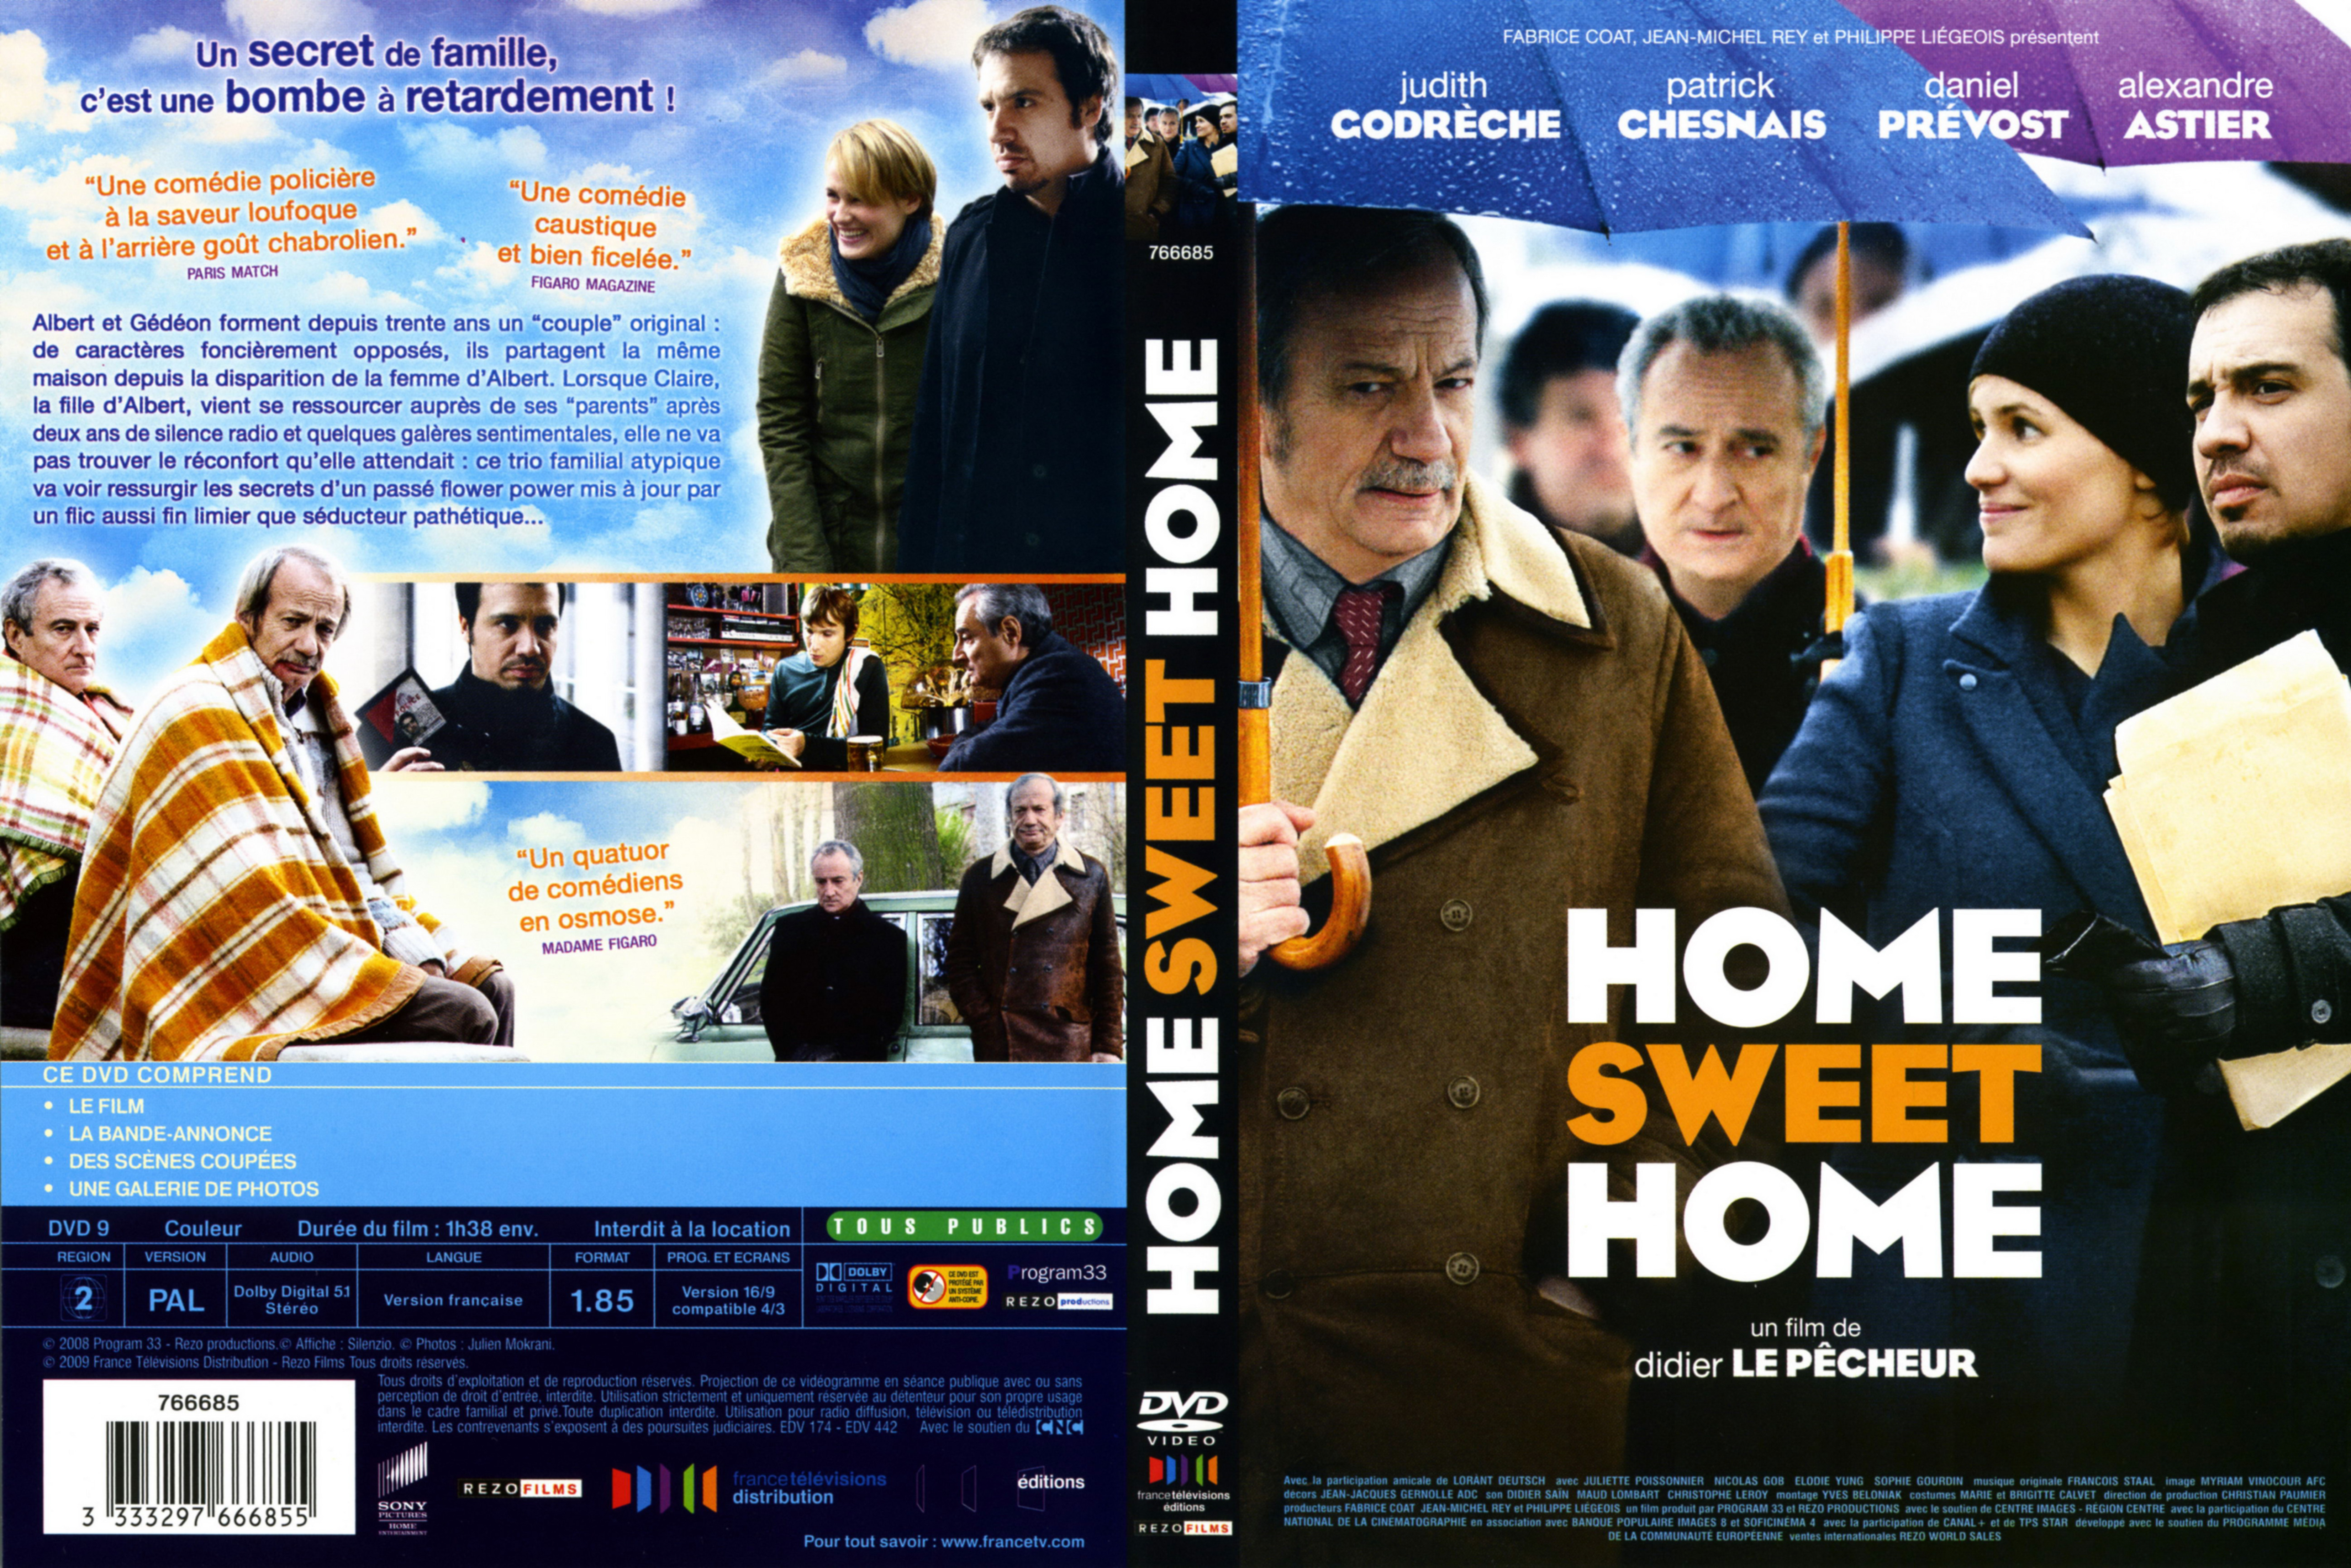 Jaquette DVD Home sweet home (2008)